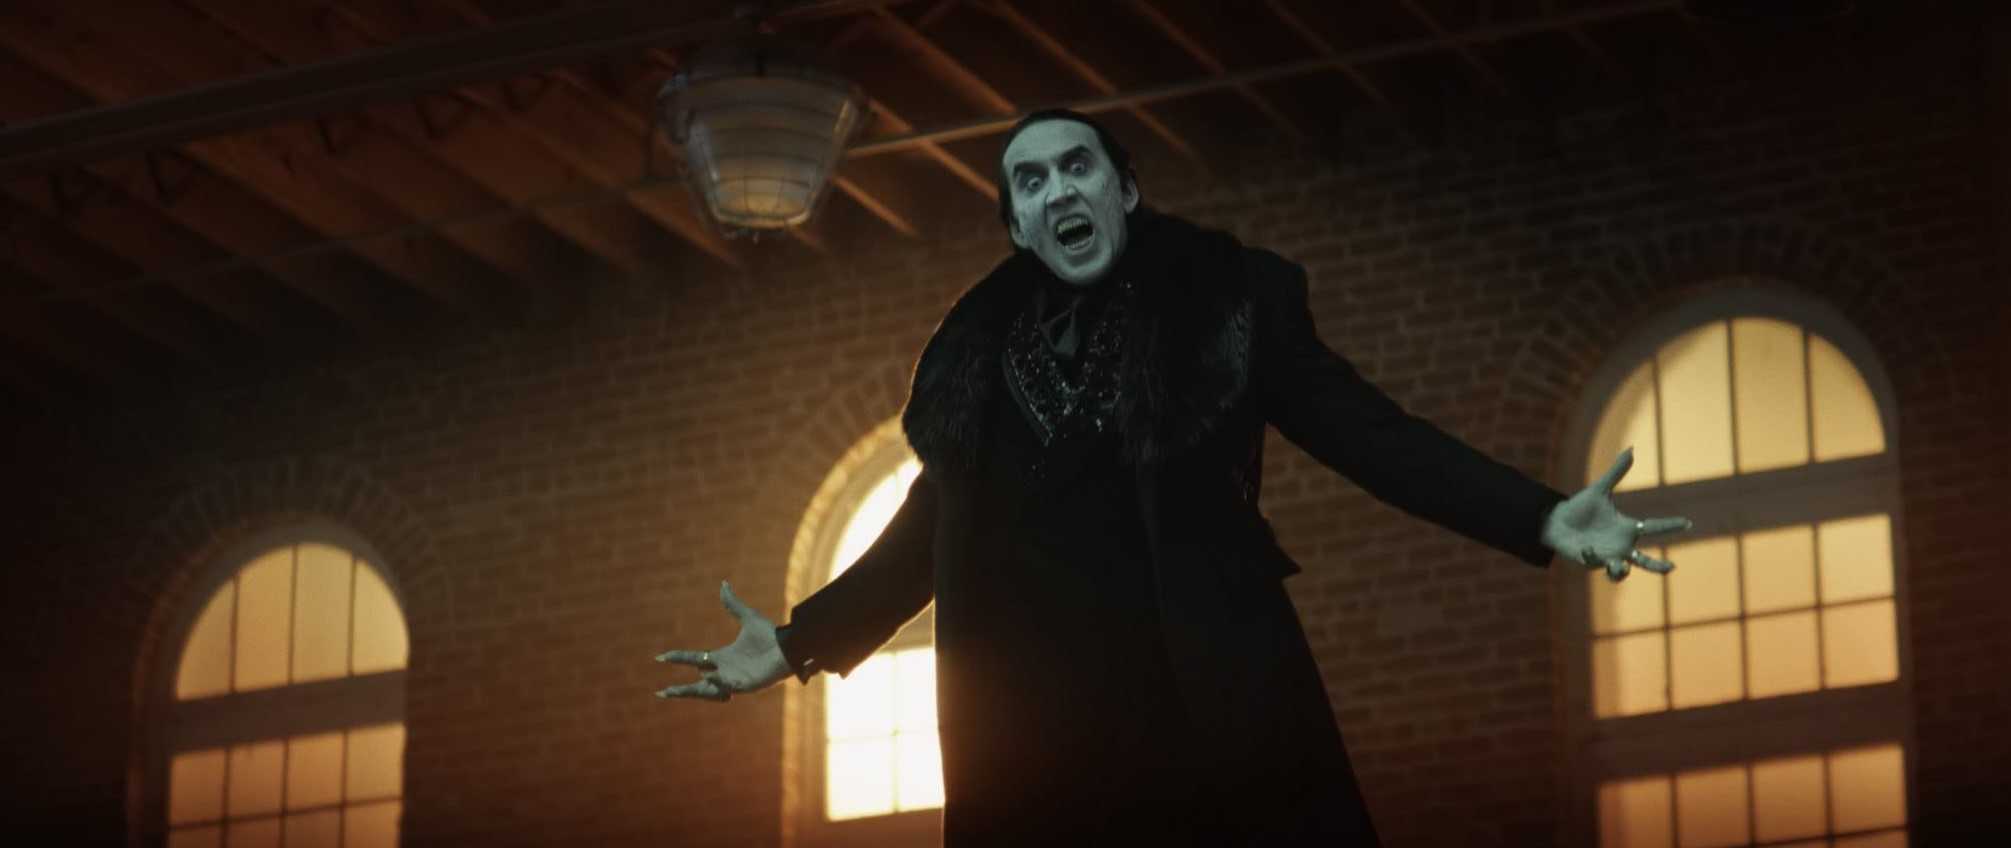 A vampire (Nicolas Cage) levitates in this image from Universal Pictures